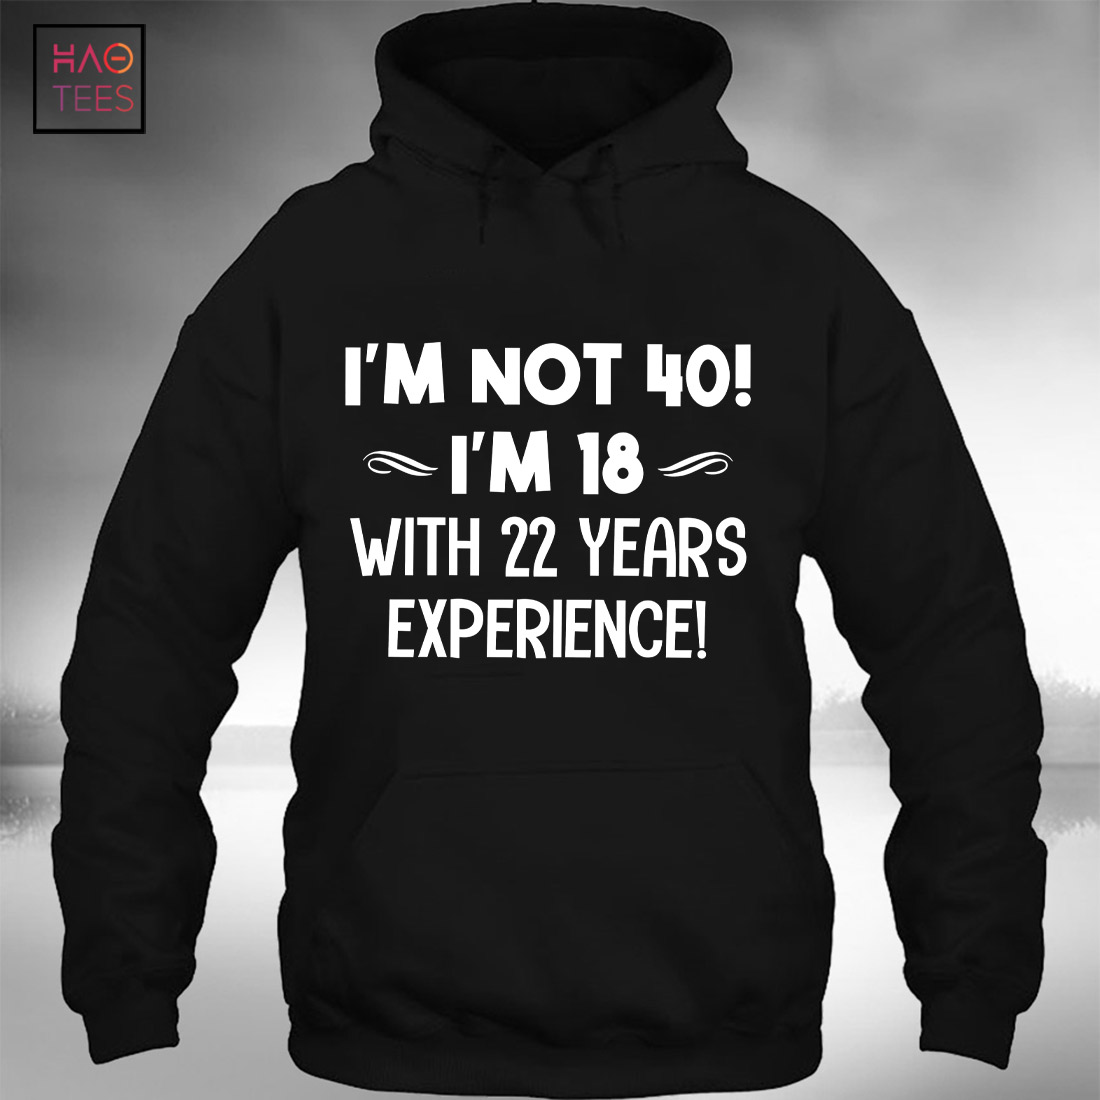 I'm Not 40! I'm 18 With 22 Years Experience T-shirt Classic